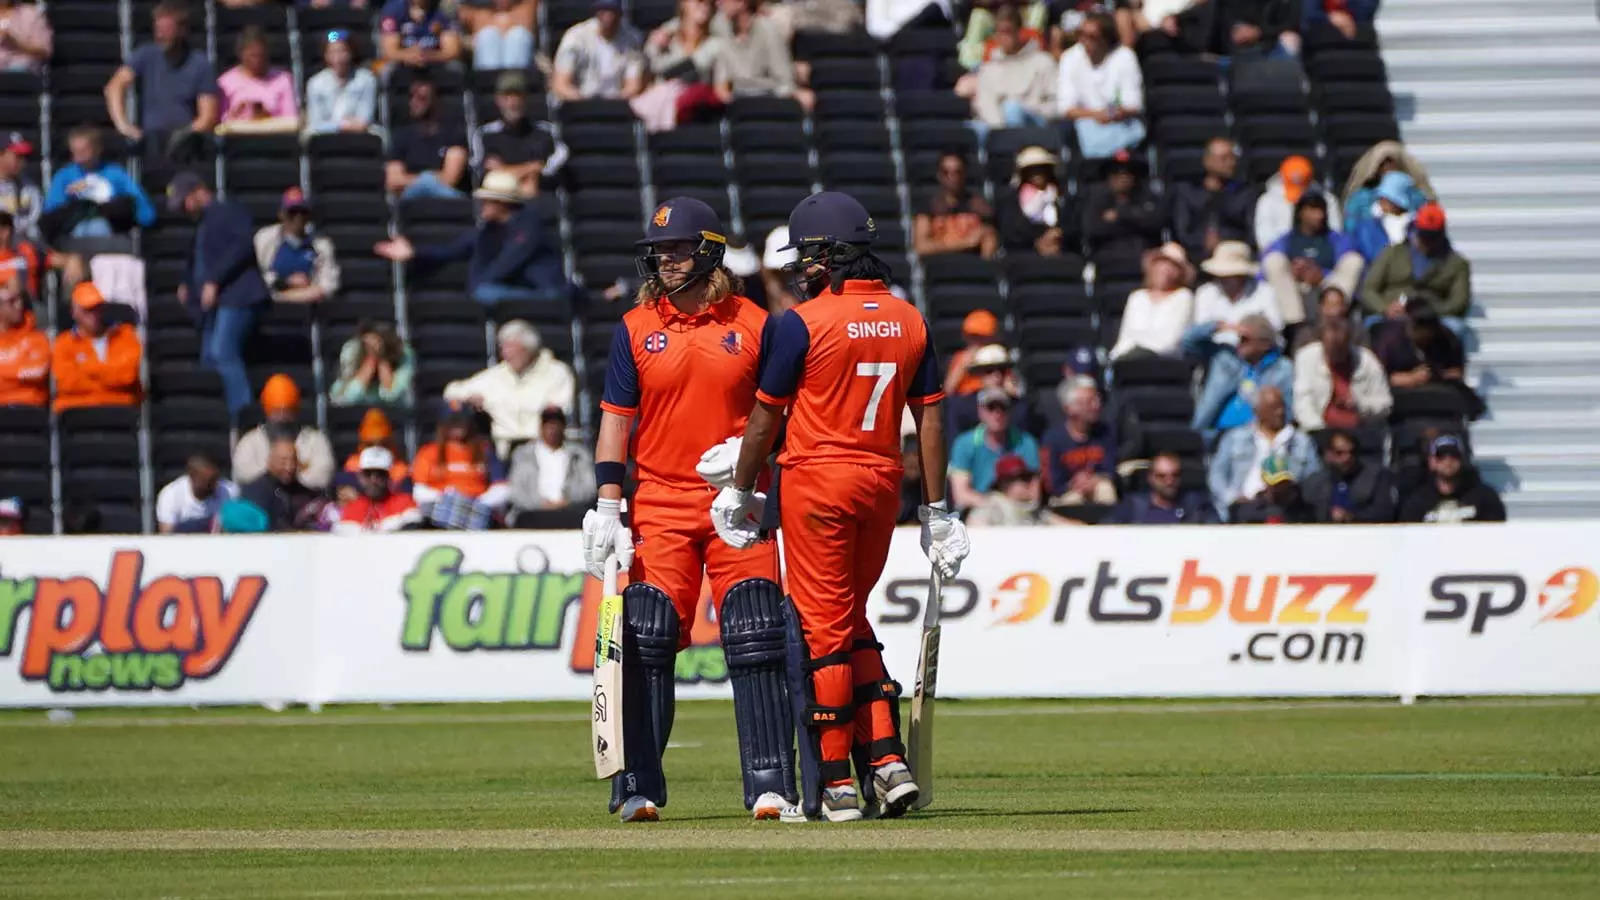 Netherlands will square off against England in 3 ODIs